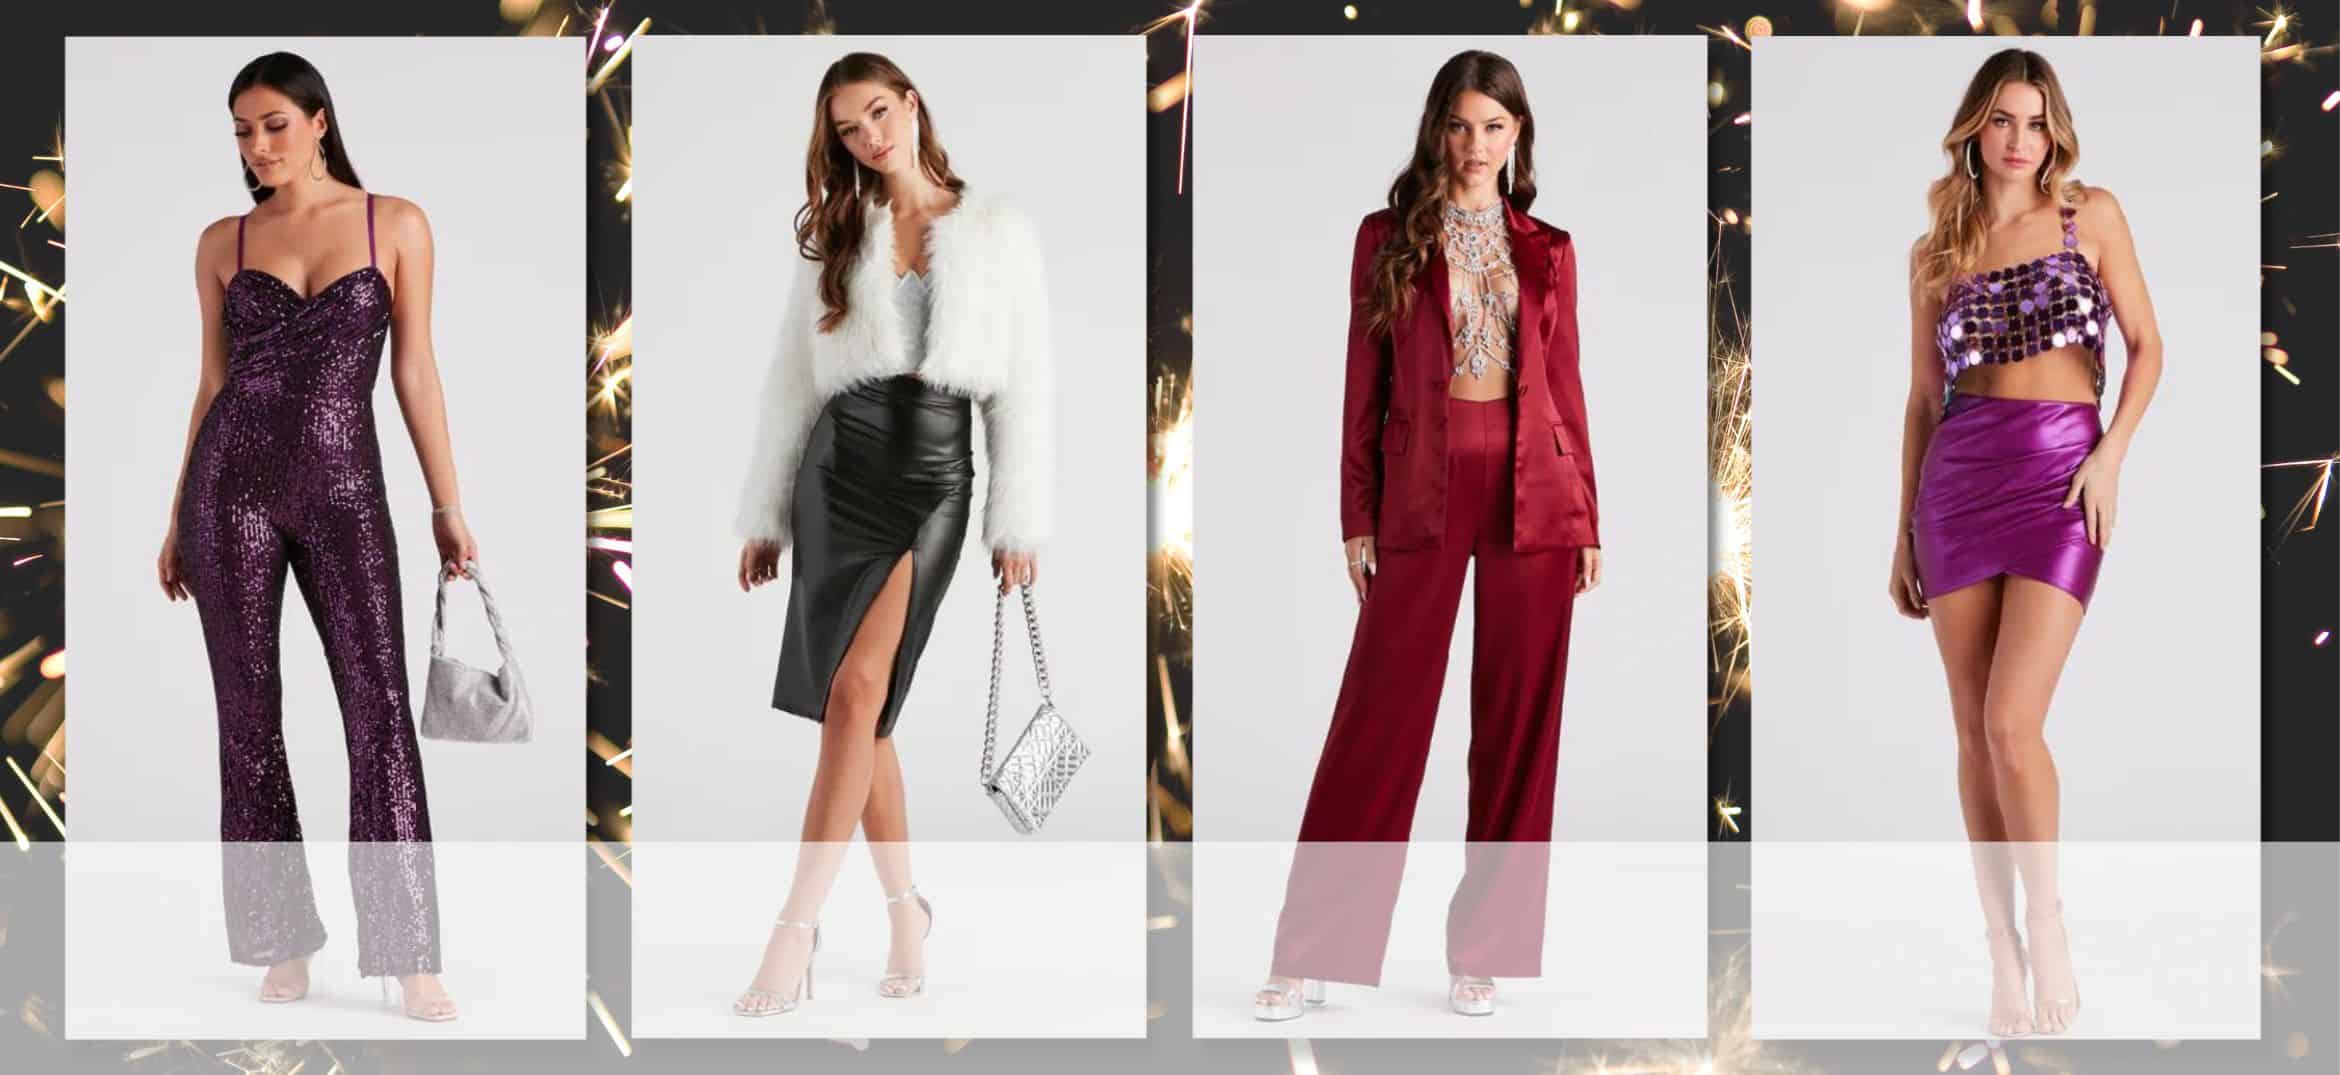 Three key trends to wear for your New Year's Eve outfit – Bad to